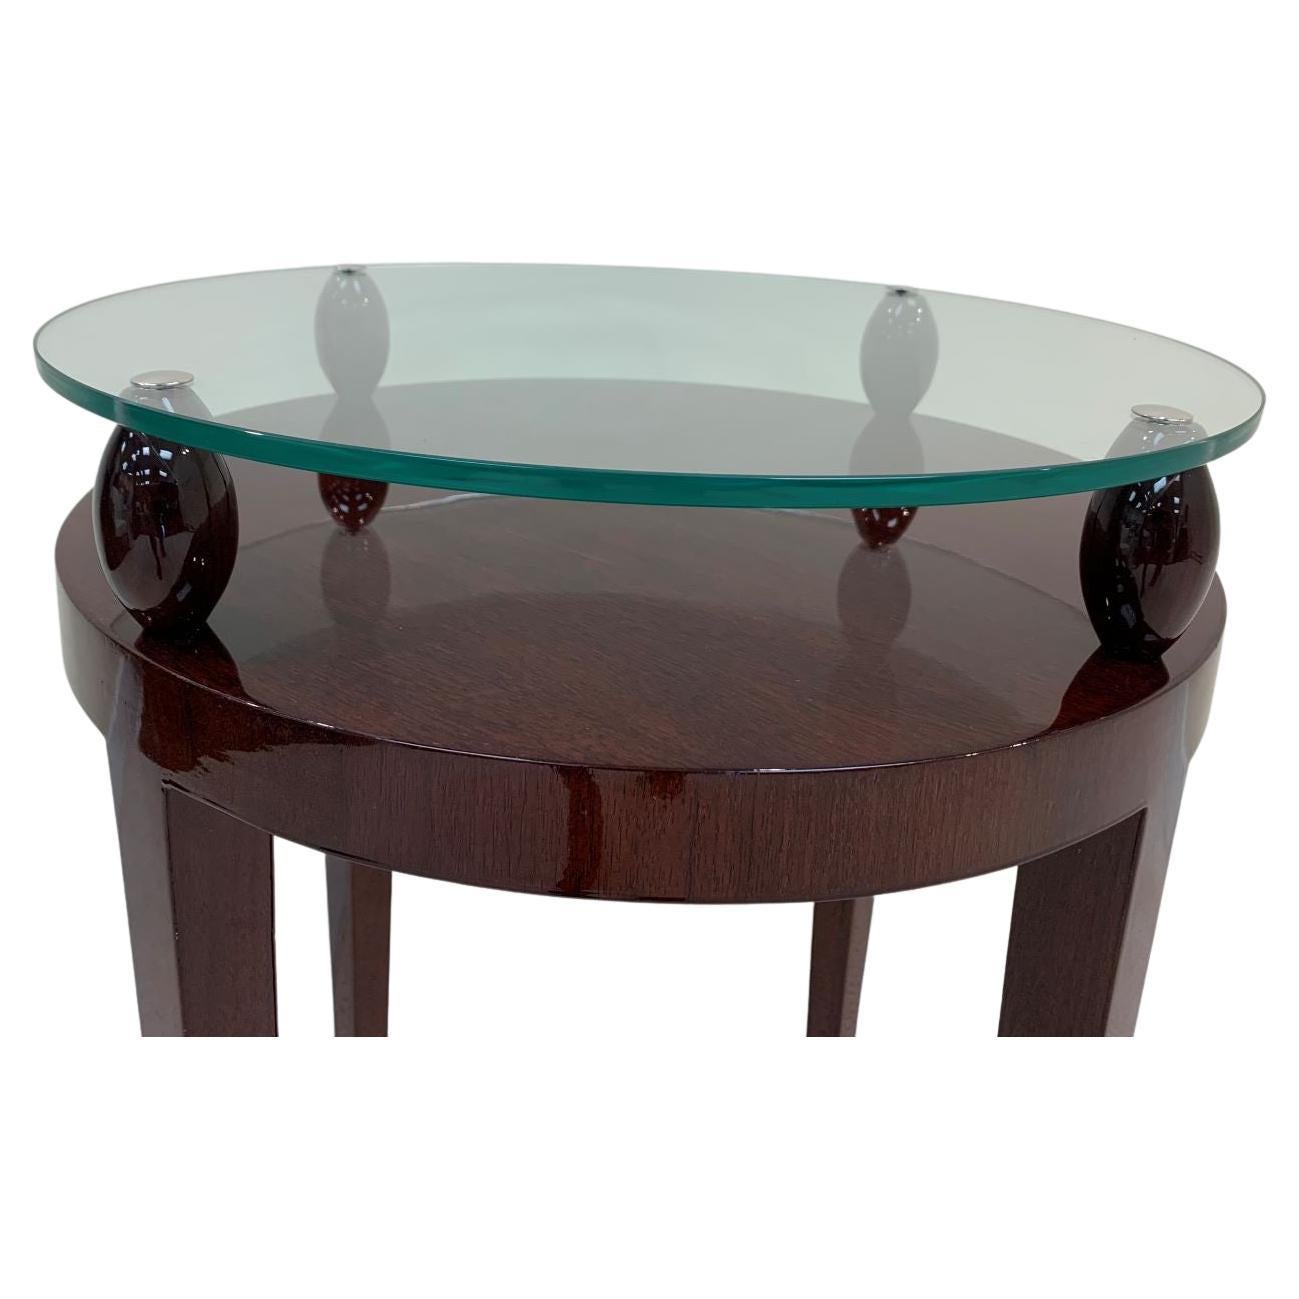 American Stunning Pair of Round  Art Deco Glass-Top Side Tables In Walnut Circa 1940's